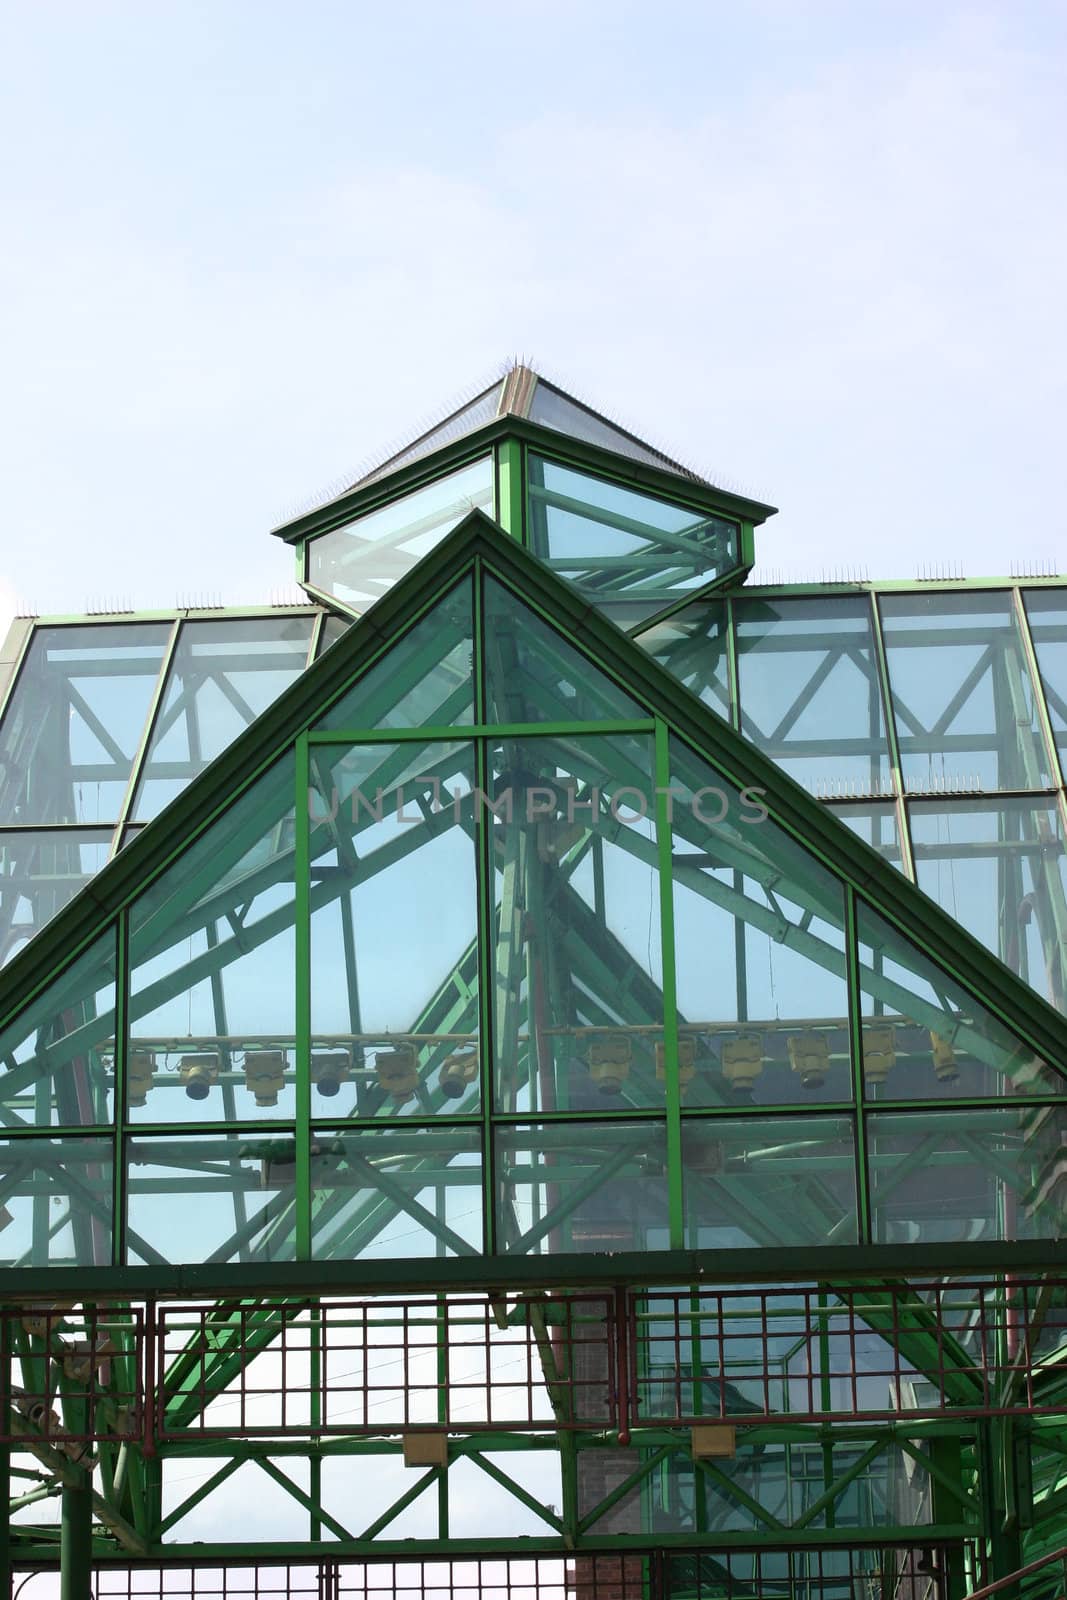 Closeup of Glass and Steel Roof of Liverpool Shopping Precinct